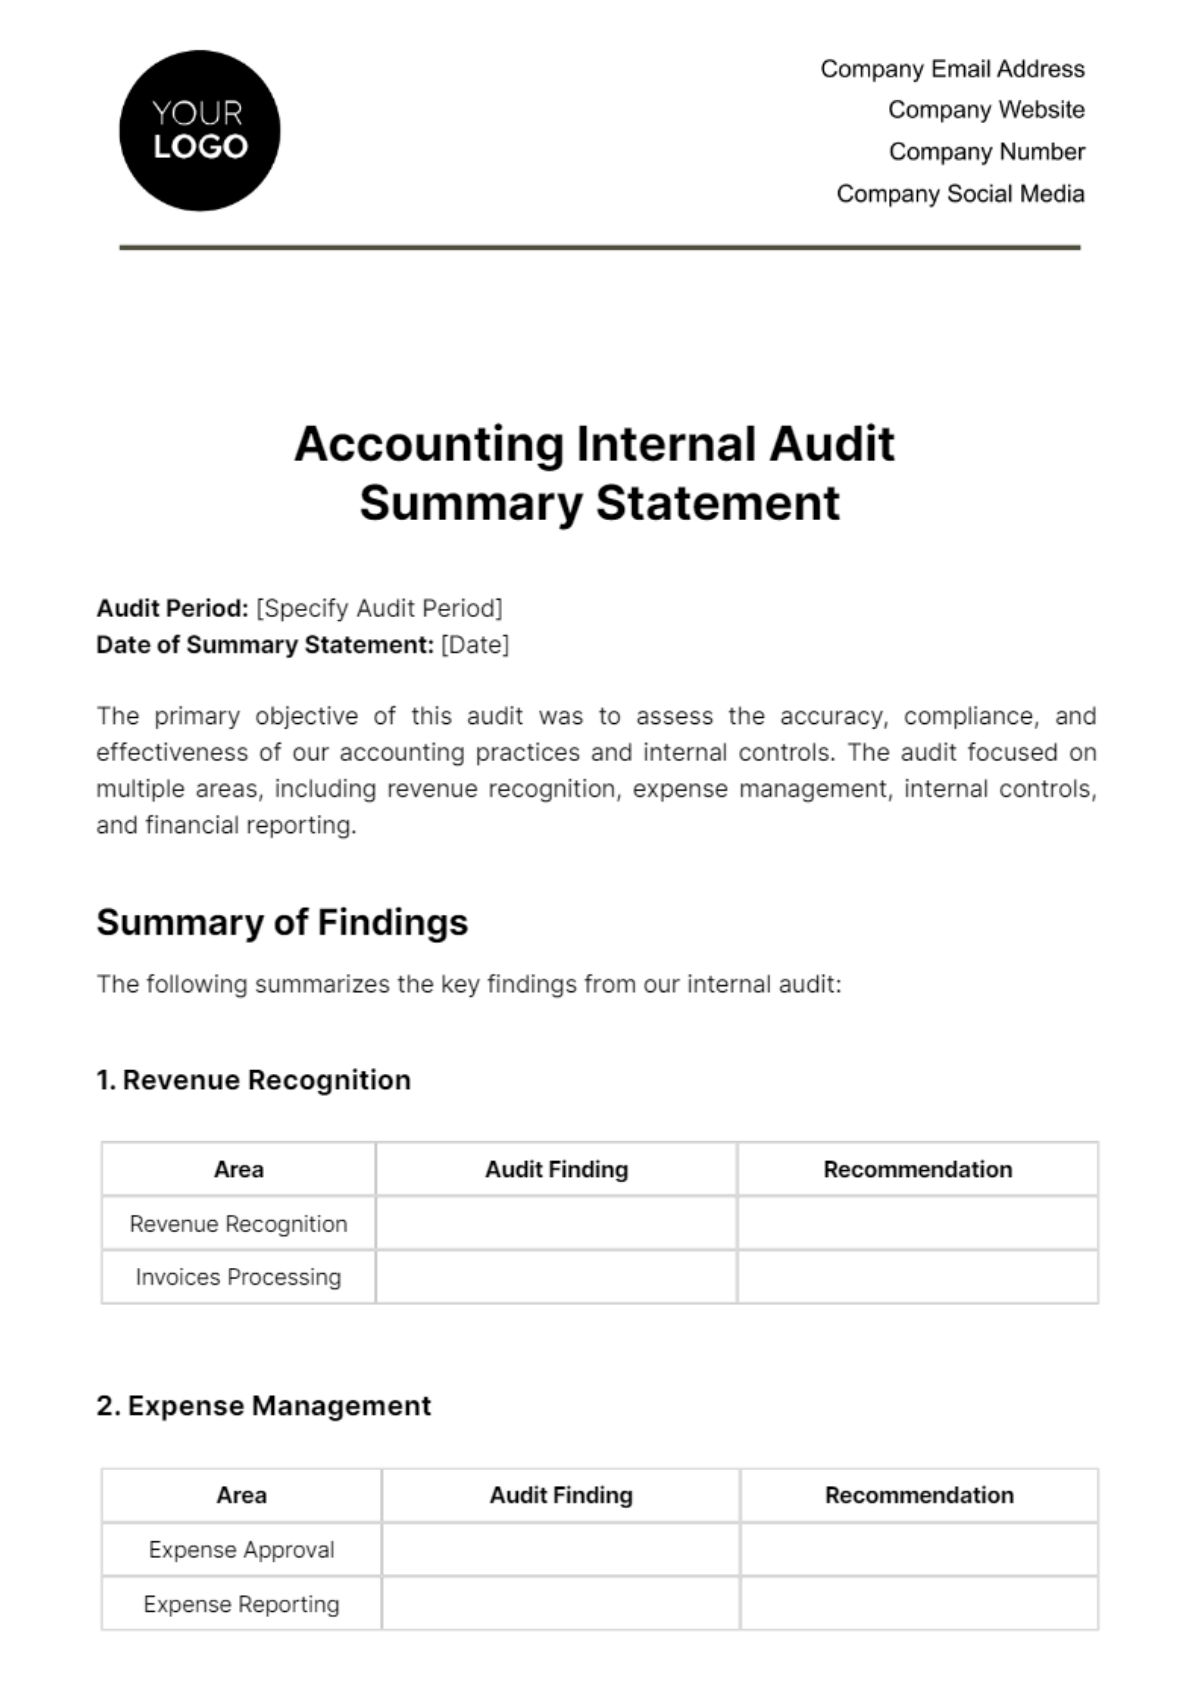 Free Accounting Internal Audit Summary Statement Template